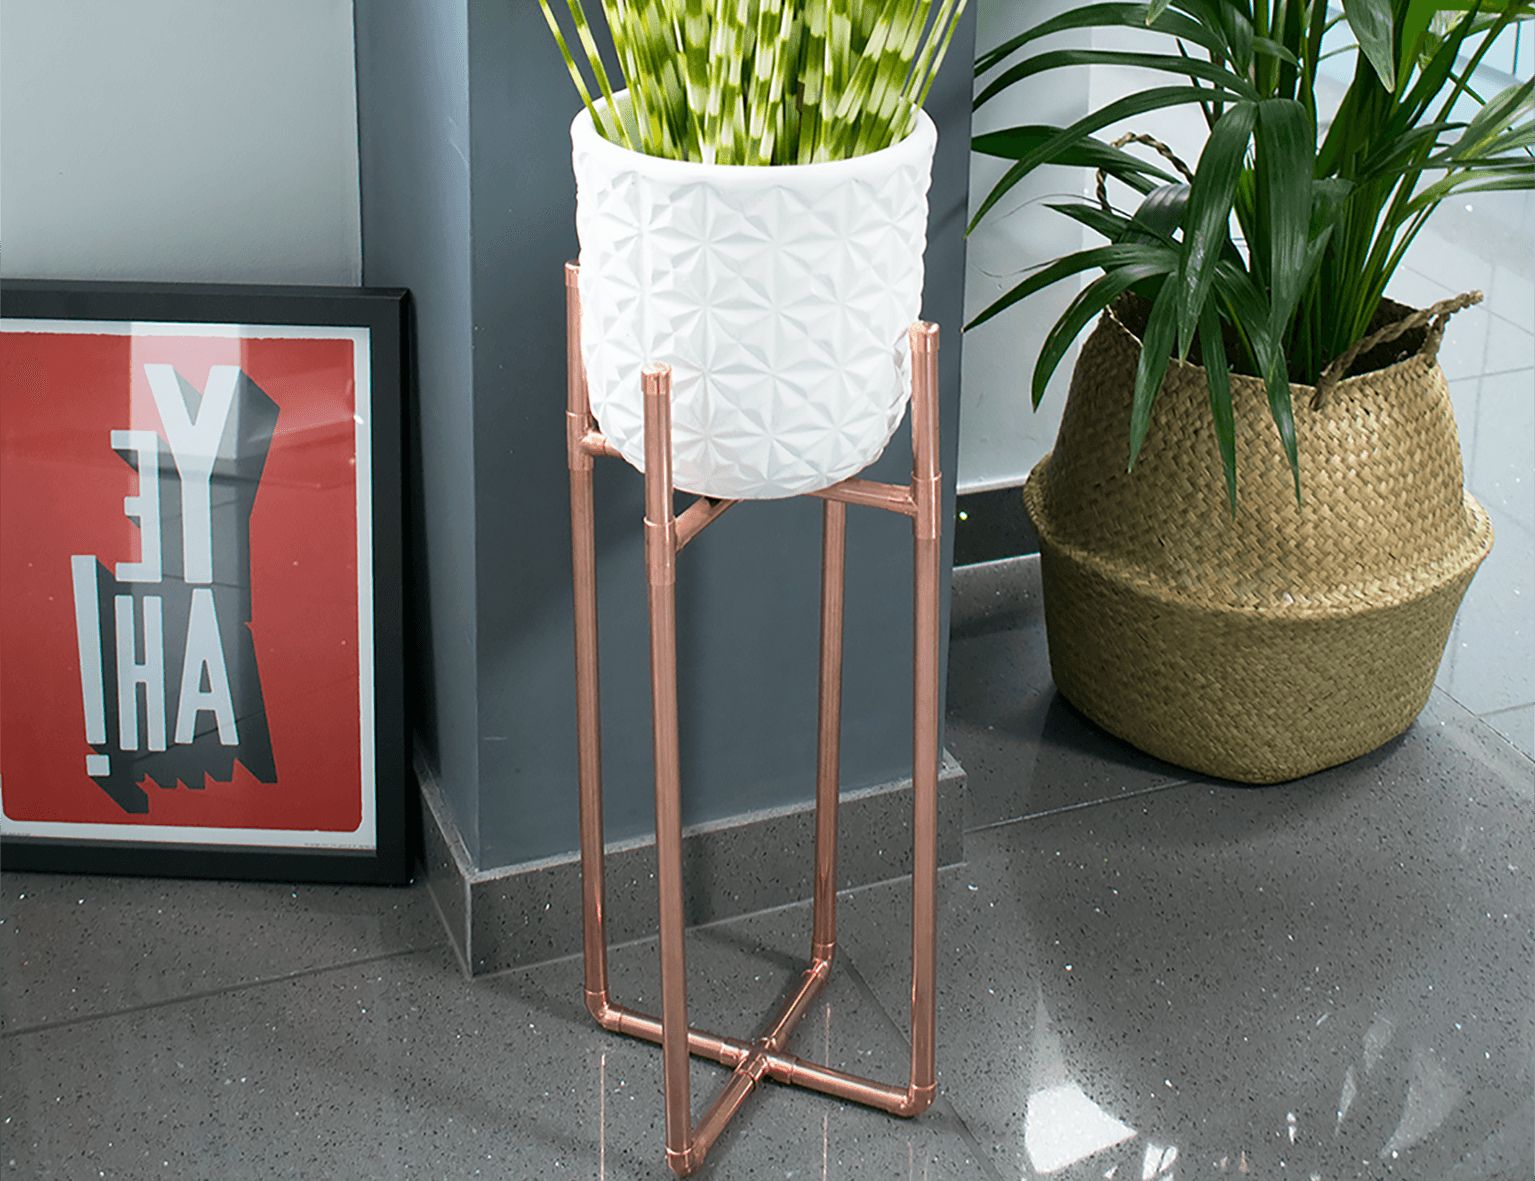 Fashionable Copper Plant Stands Pertaining To How To Make A Diy Copper Plant Stand – Caradise (View 9 of 10)